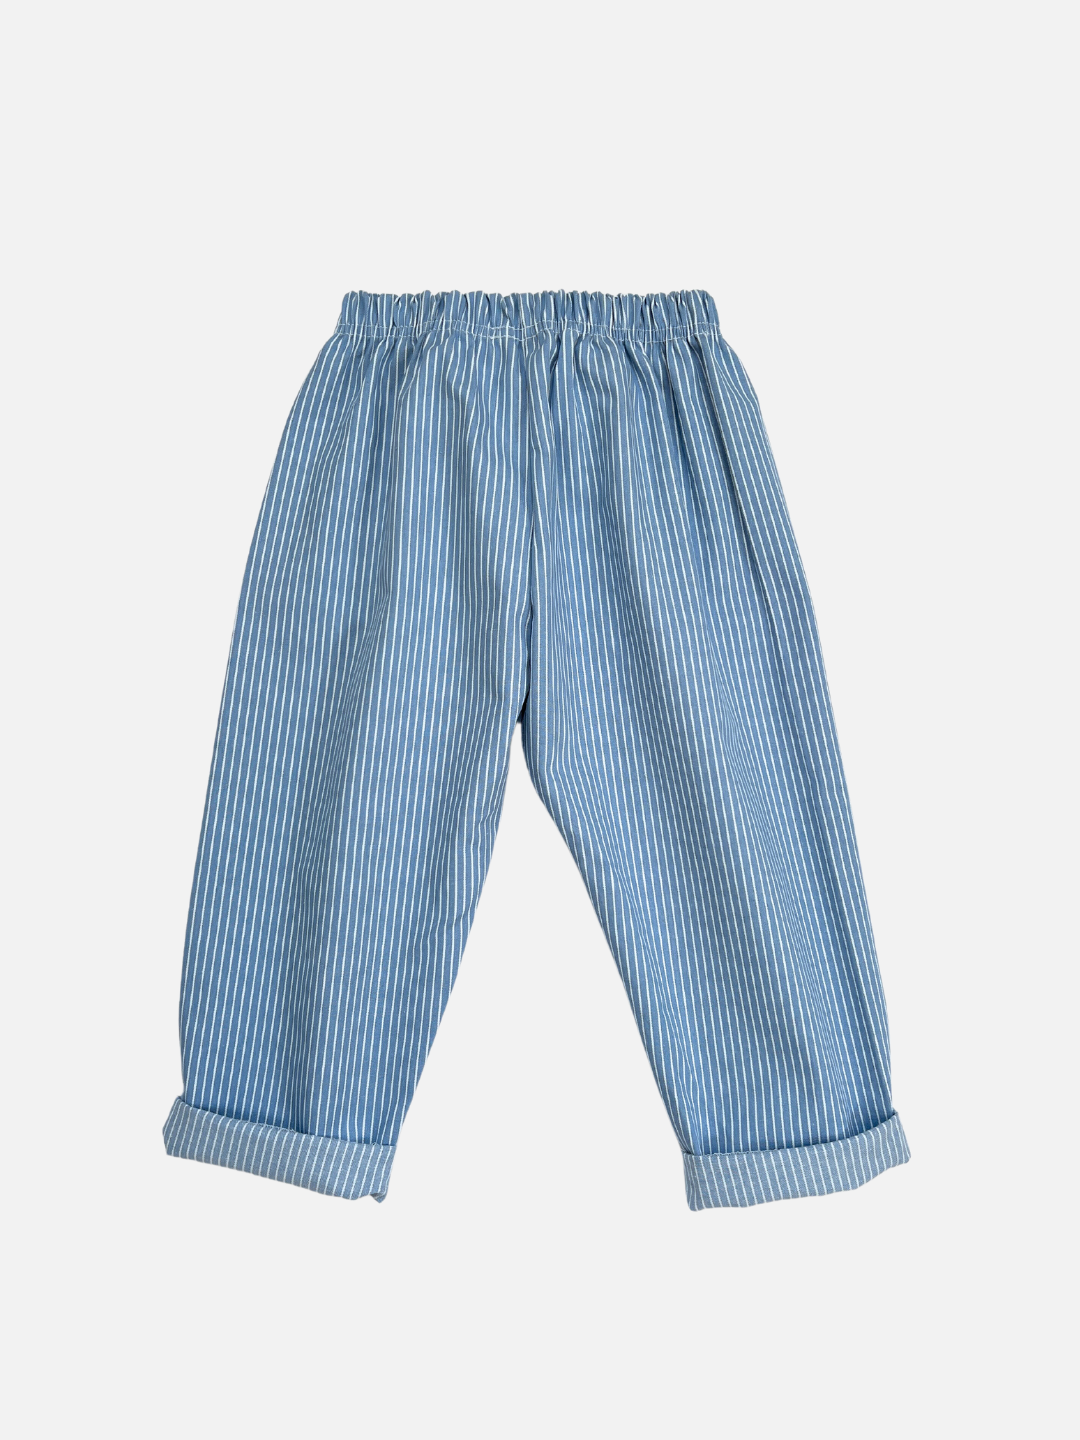 Back view of kids light blue pants with narrow white vertical stripes, cuffed at the ankle.